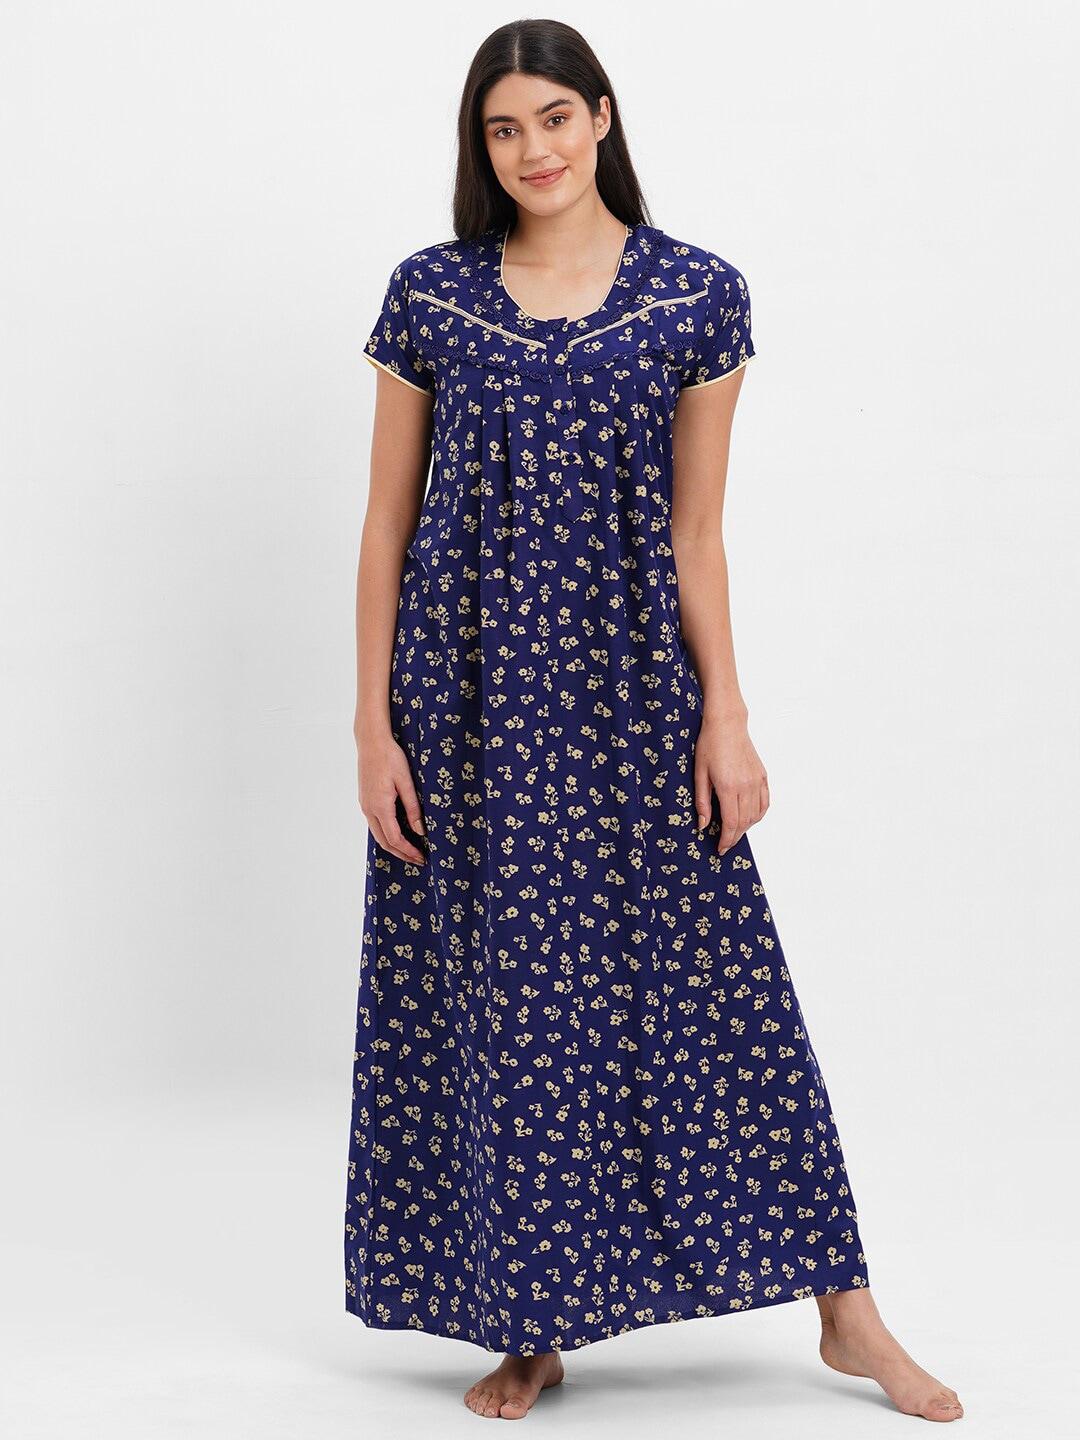 sweet-dreams-navy-blue-floral-printed-maxi-nightdress